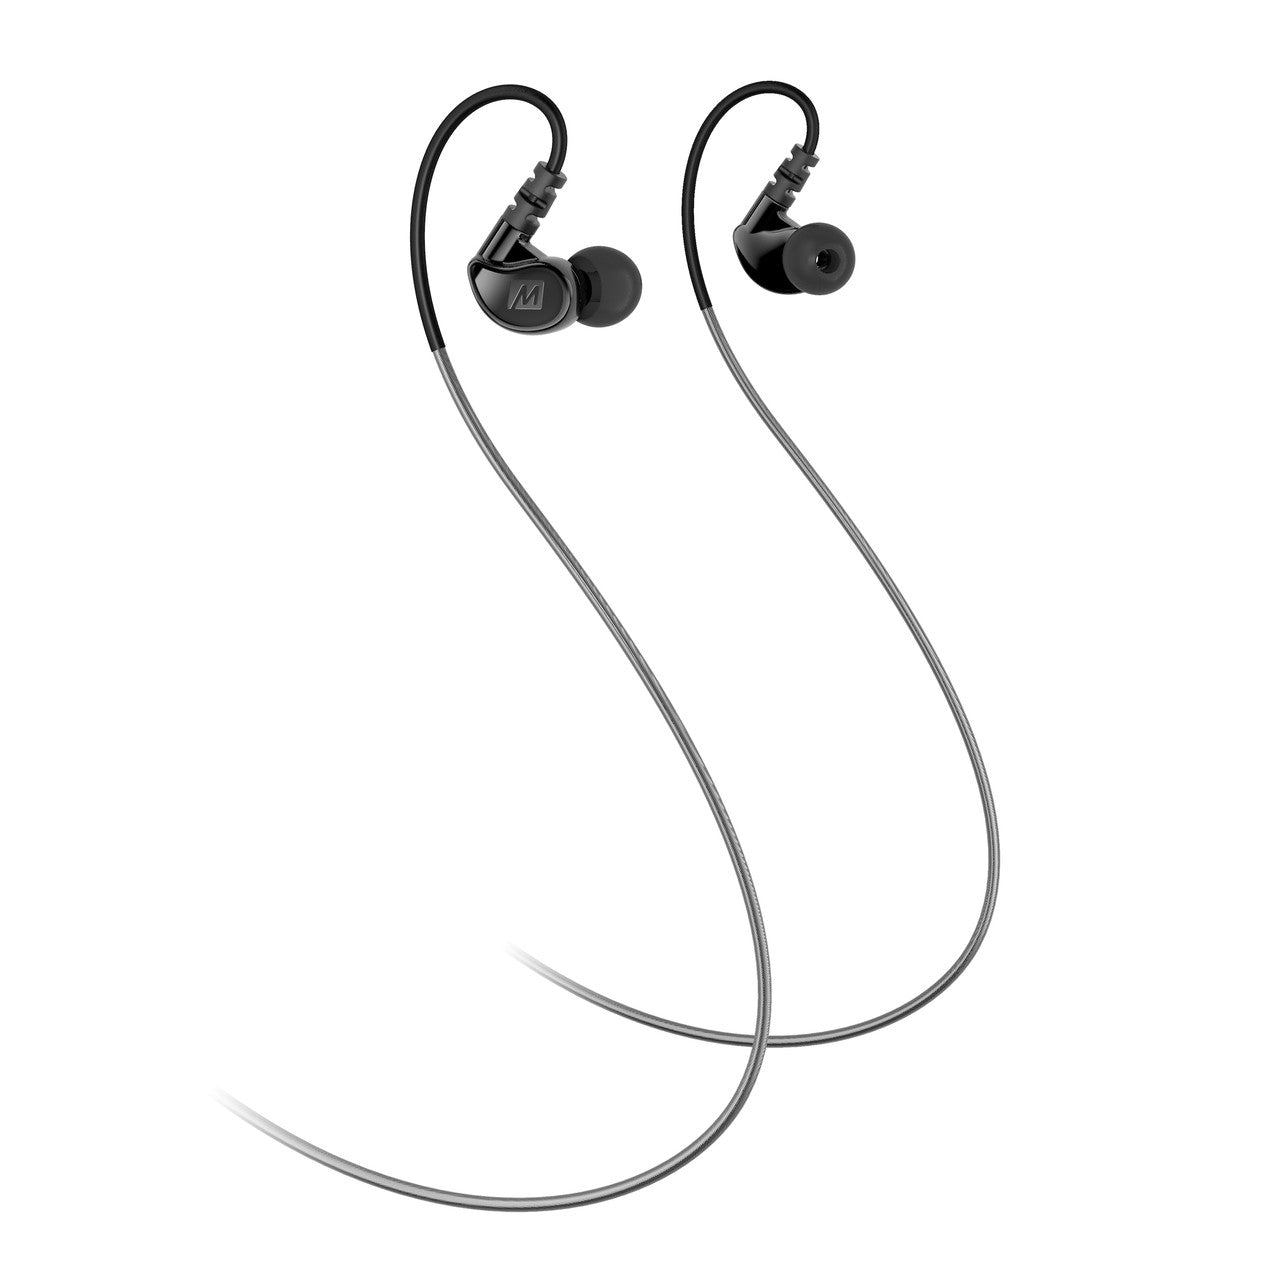 Image of M6 In-Ear Sports Headphones with Memory Wire (3.5mm Plug).